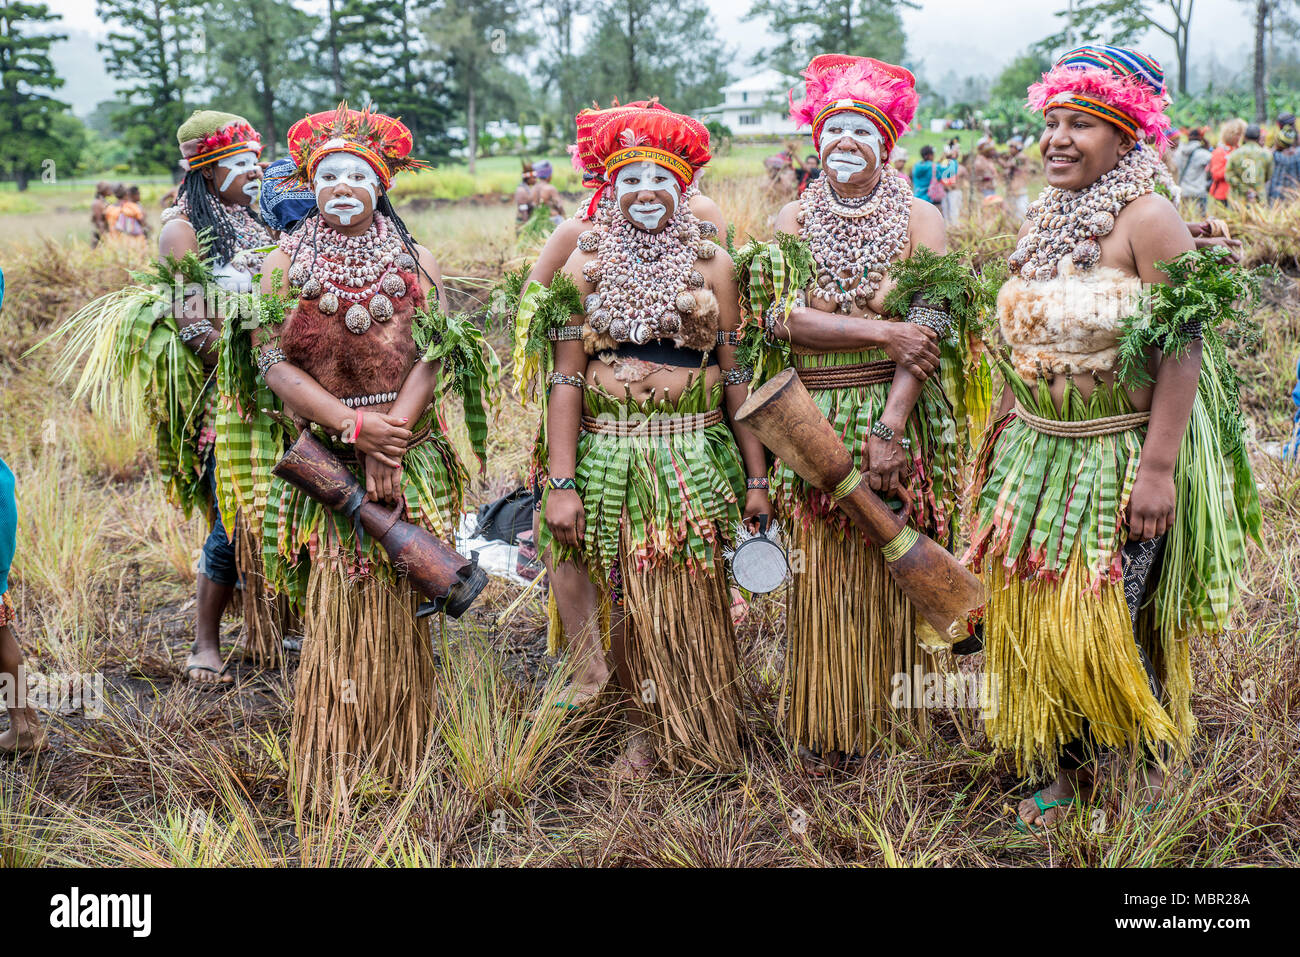 A group of women in traditional costume, Mount Hagen Cultural Show, Papua New Guinea Stock Photo